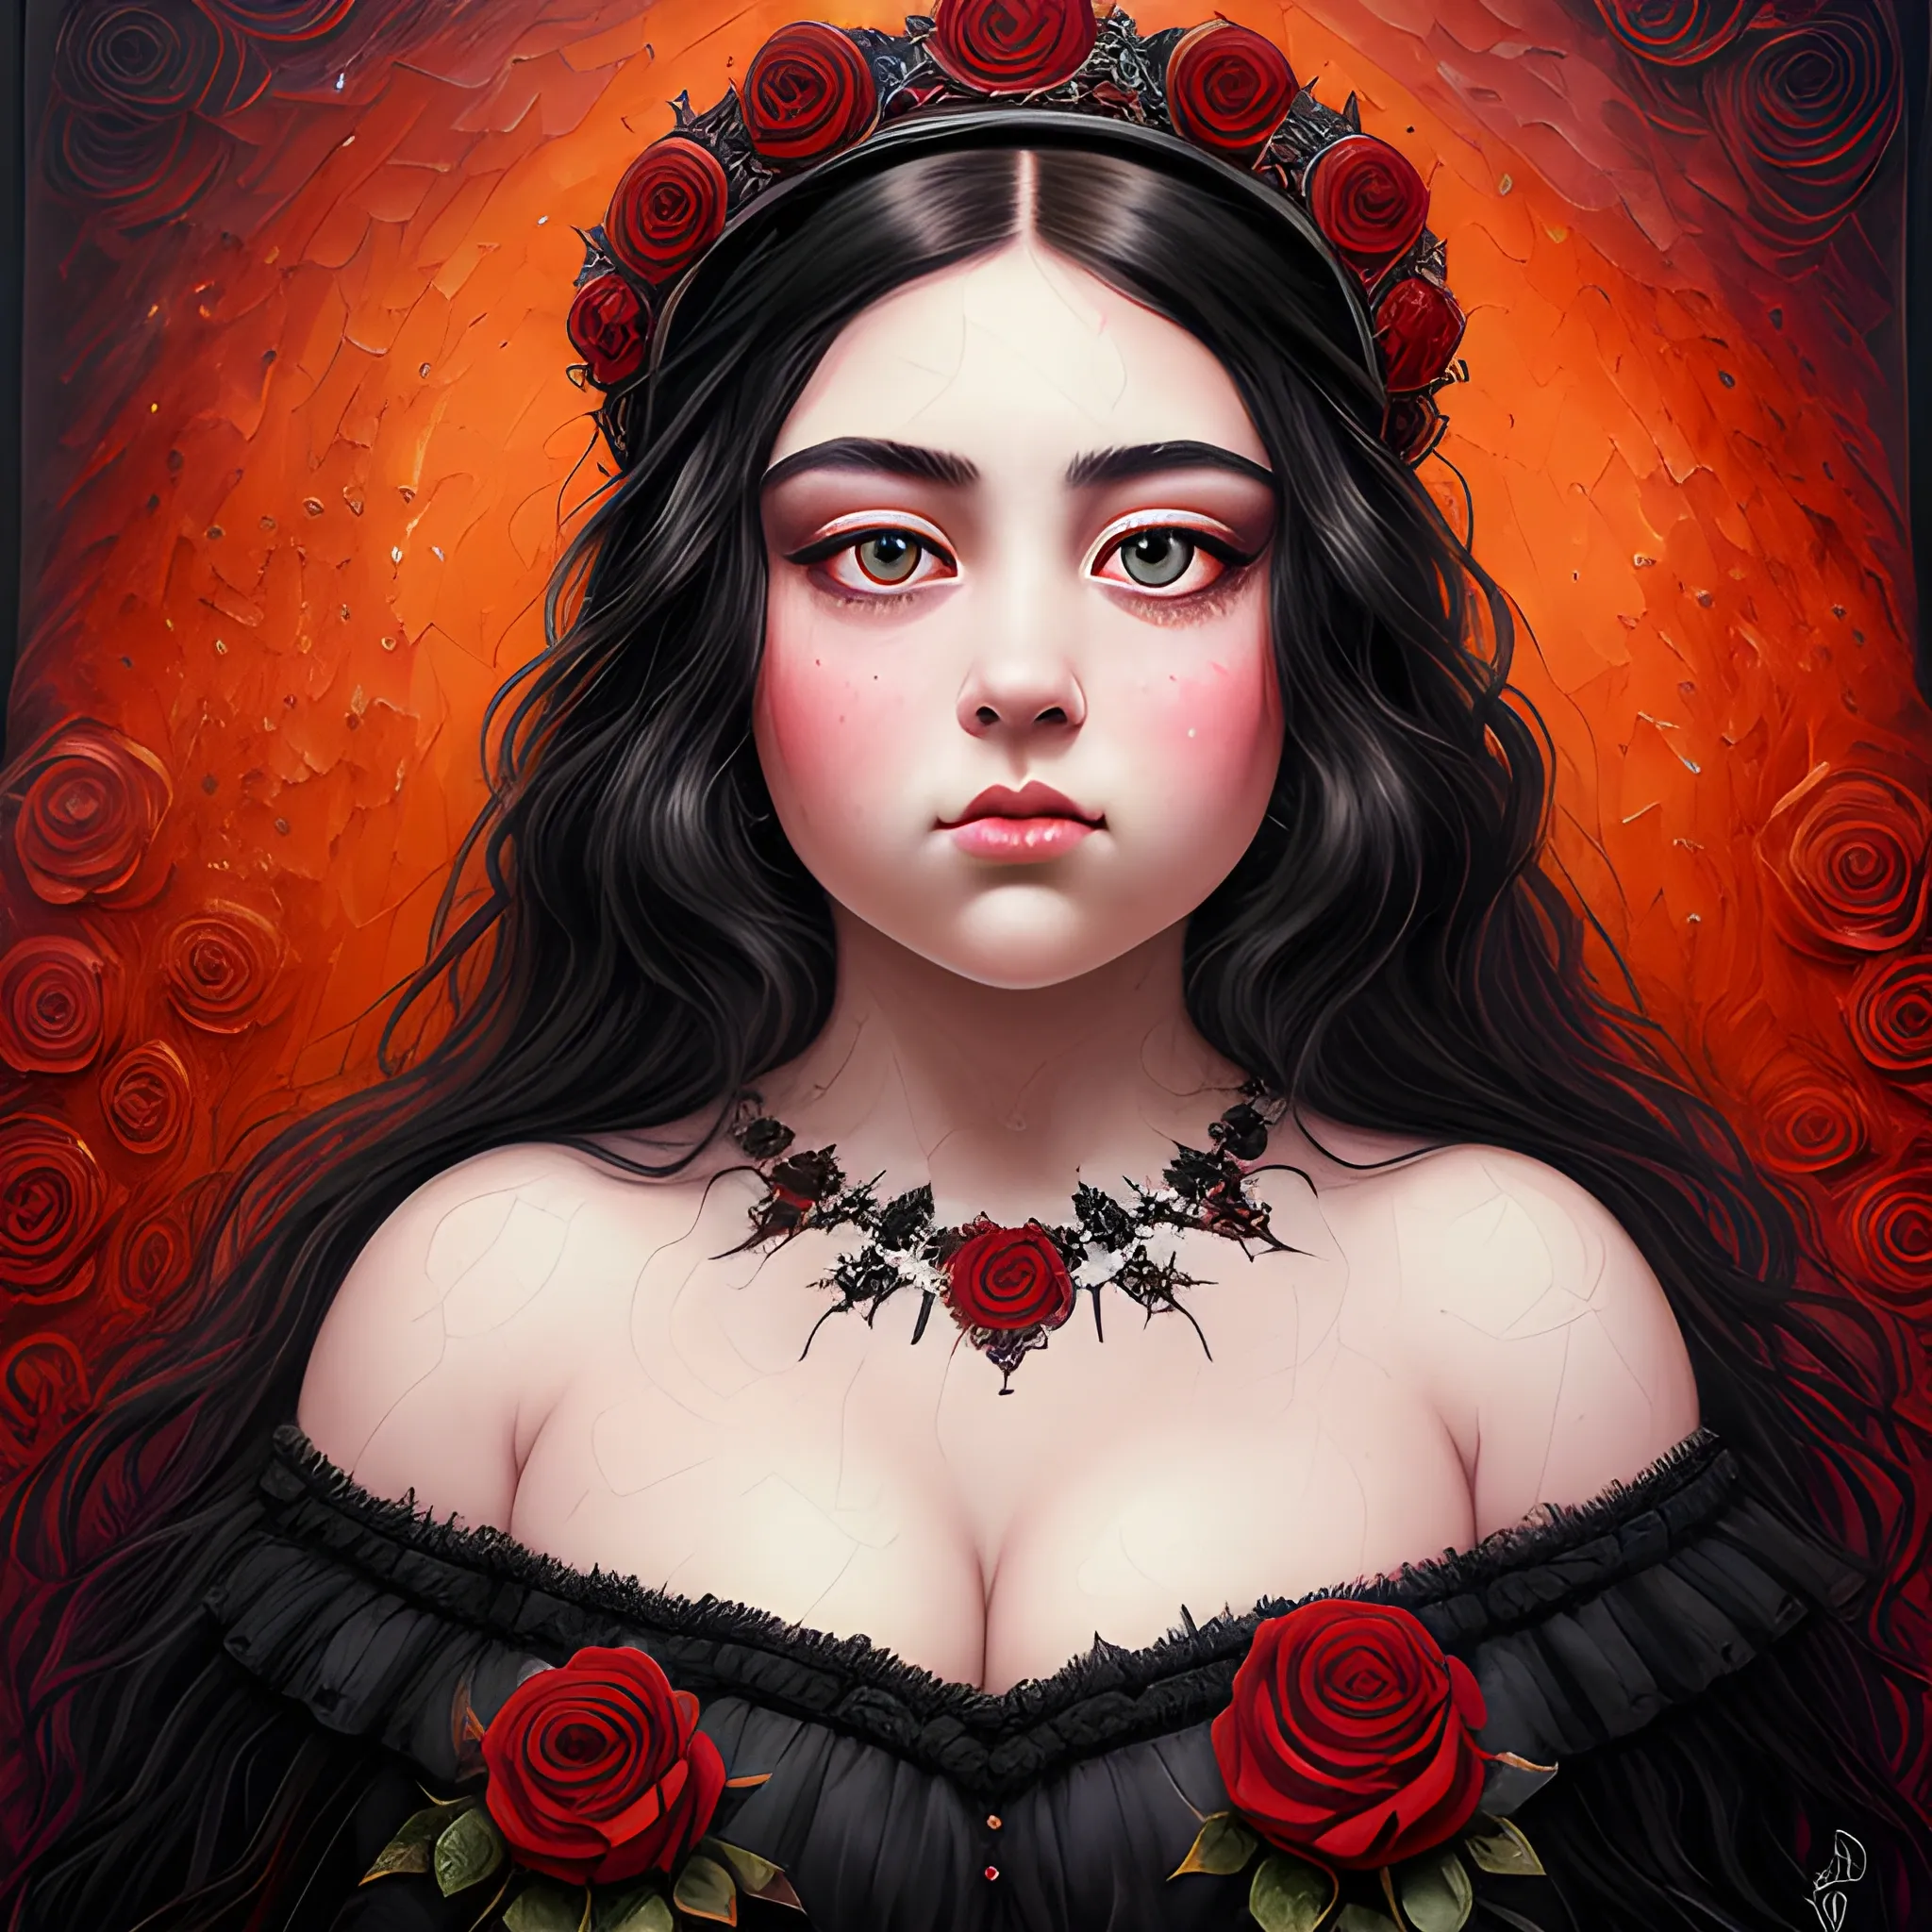 (((high detail))), best quality, Warm Colors, (detailed), (high resolution)Black long-haired female, curvy face, with rosy cheeks, big black eyes, thick eyelashes, thick peach lips, thick eyebrows,  with a black and red dress, roses of backround  
holding a bloody crown in handTrippy, Oil Painting, wallper , 